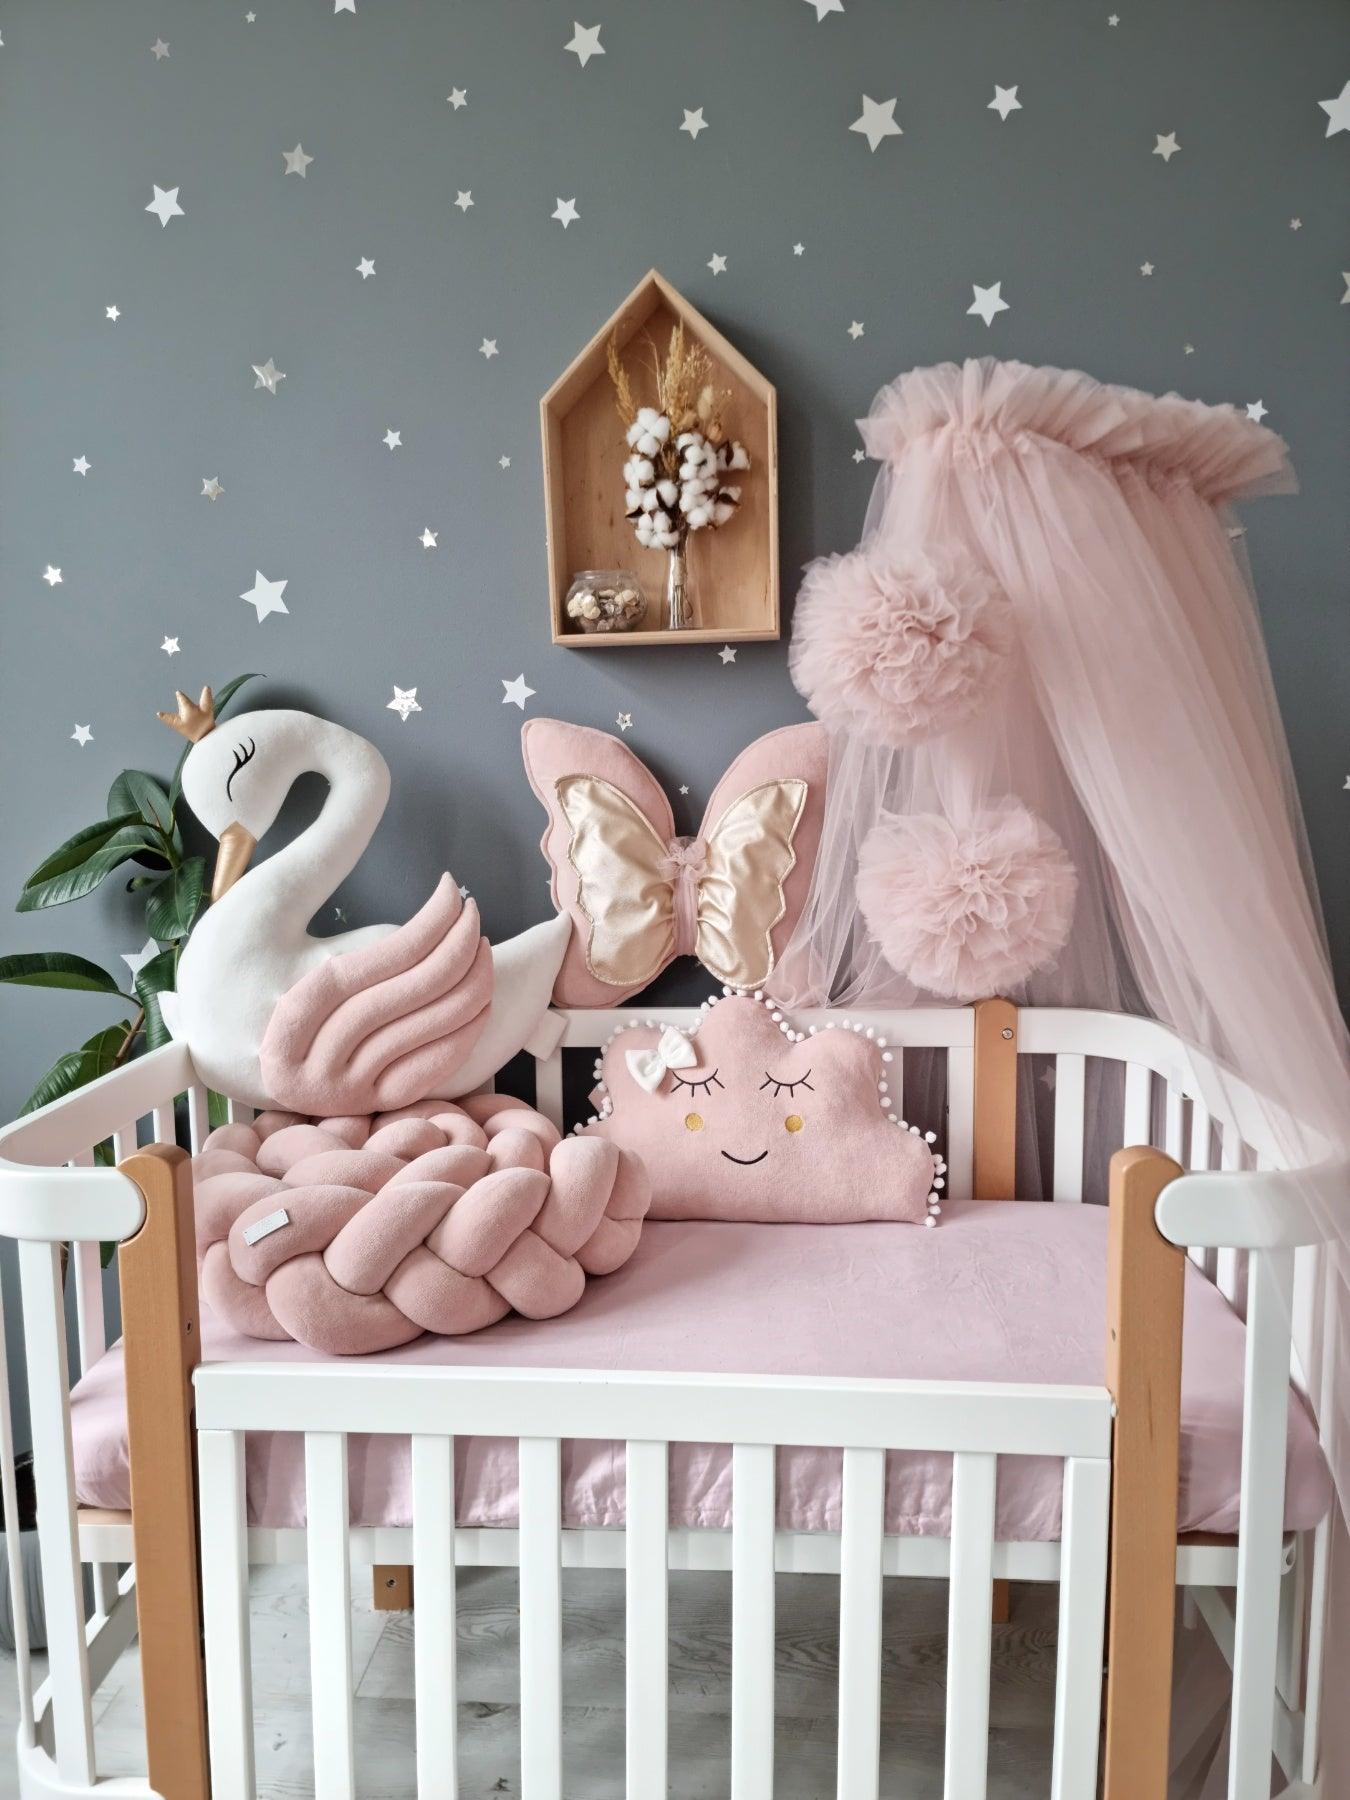 Soft Knot Pillow Decorative Baby Bedding Sheets Braided Crib